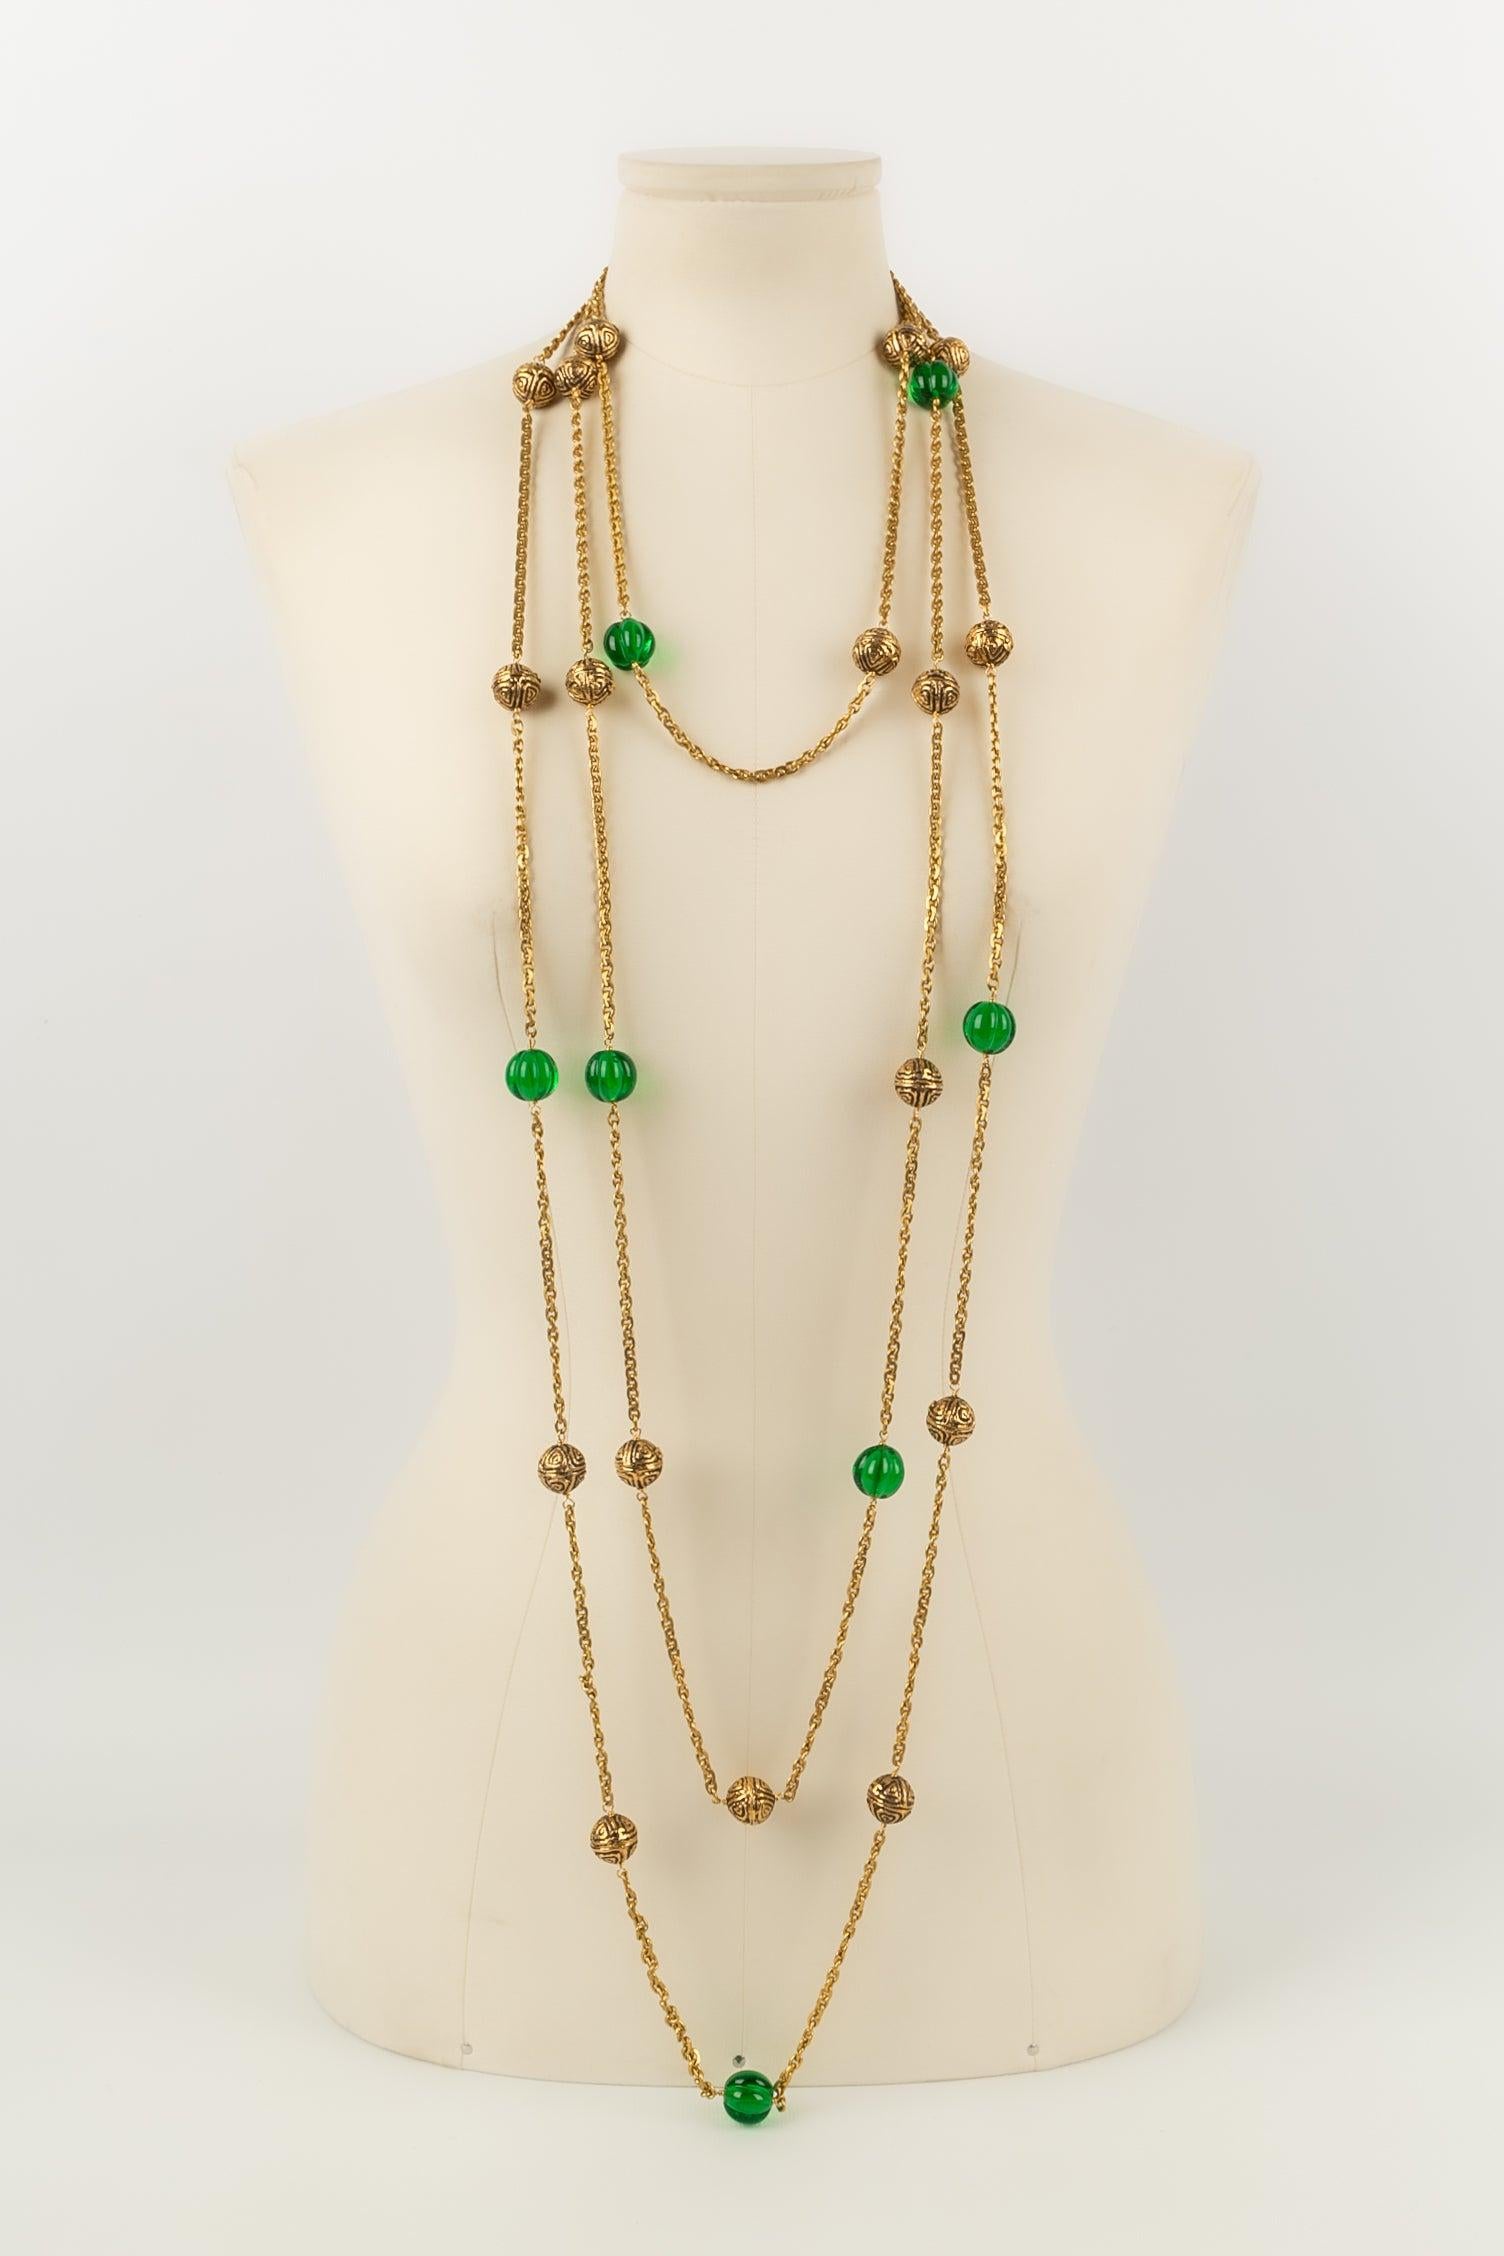 Chanel Long Necklace in Gold Metal and Glass Beads In Excellent Condition For Sale In SAINT-OUEN-SUR-SEINE, FR